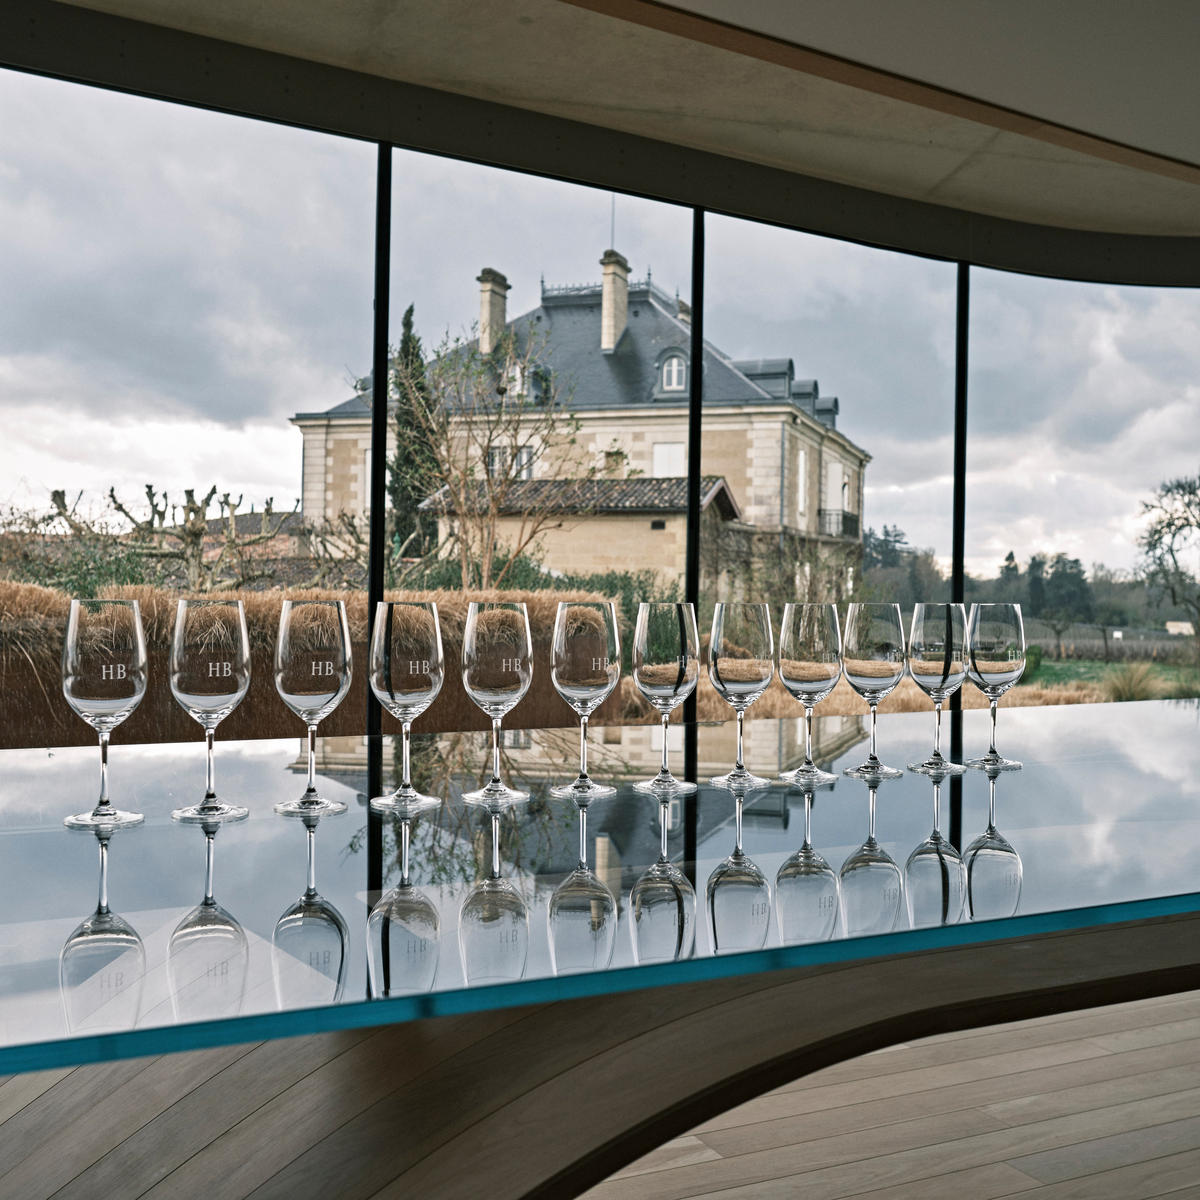 The view from the tasting room at Château Haut-Bailly; glasses are lined up on a table and the château building is visible in the background.